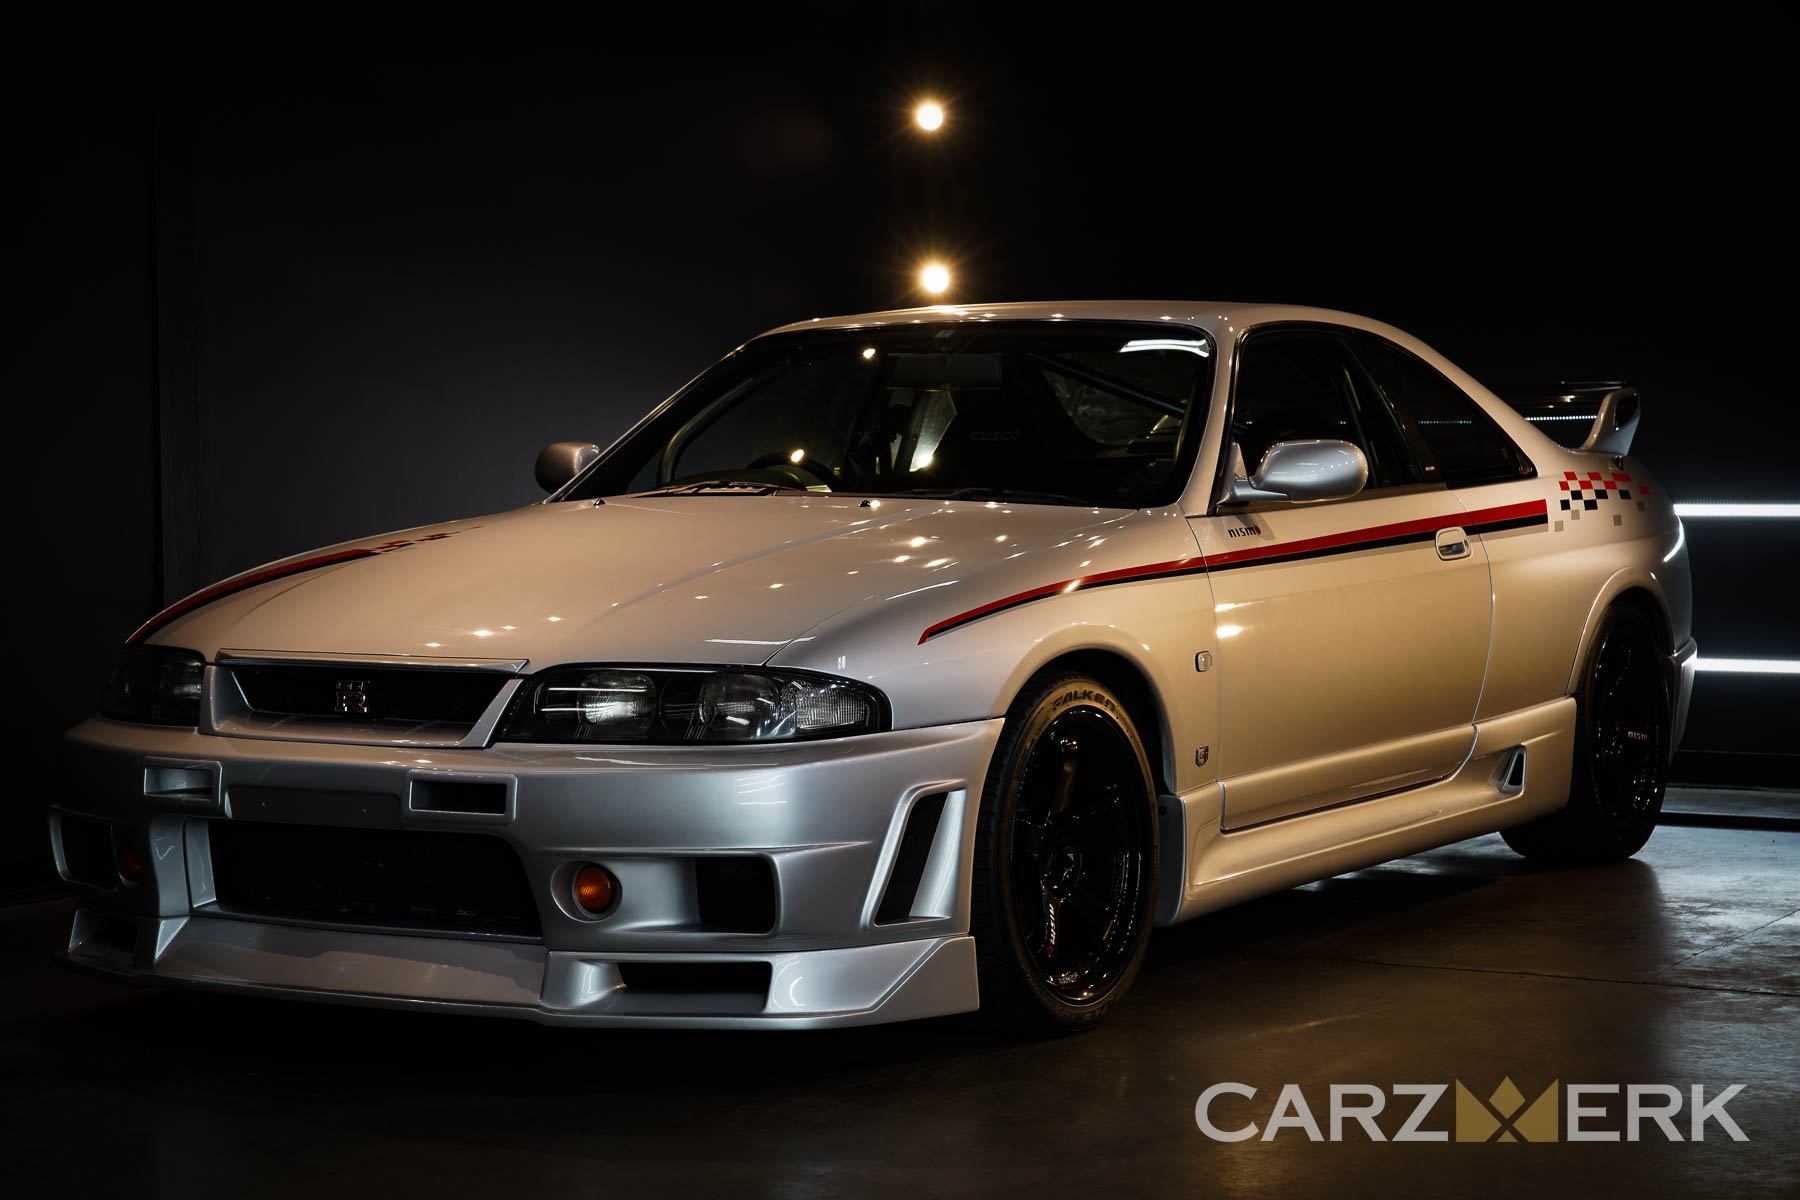 1995 Nissan GTR33 V-Spec | BCNR33 Spark Silver Metallic with Nismo LMGT4 - After Restorative Detail, Paint Correction, Side Decal Application and Ceramic Coating